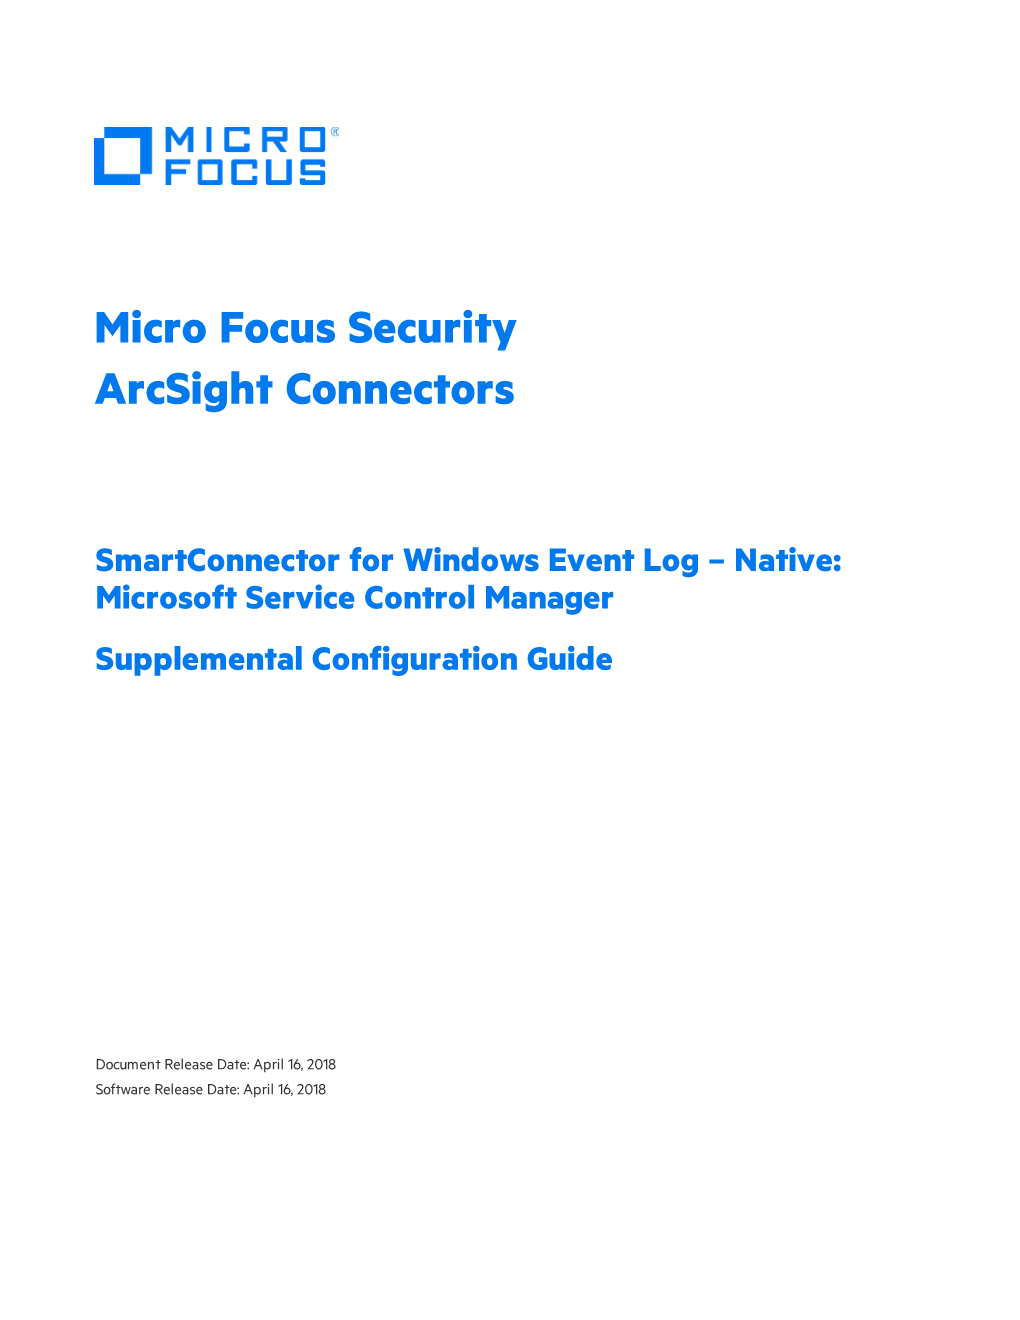 Micro Focus Smartconnector for Windows Event Log – Native: Microsoft Service Control Manager